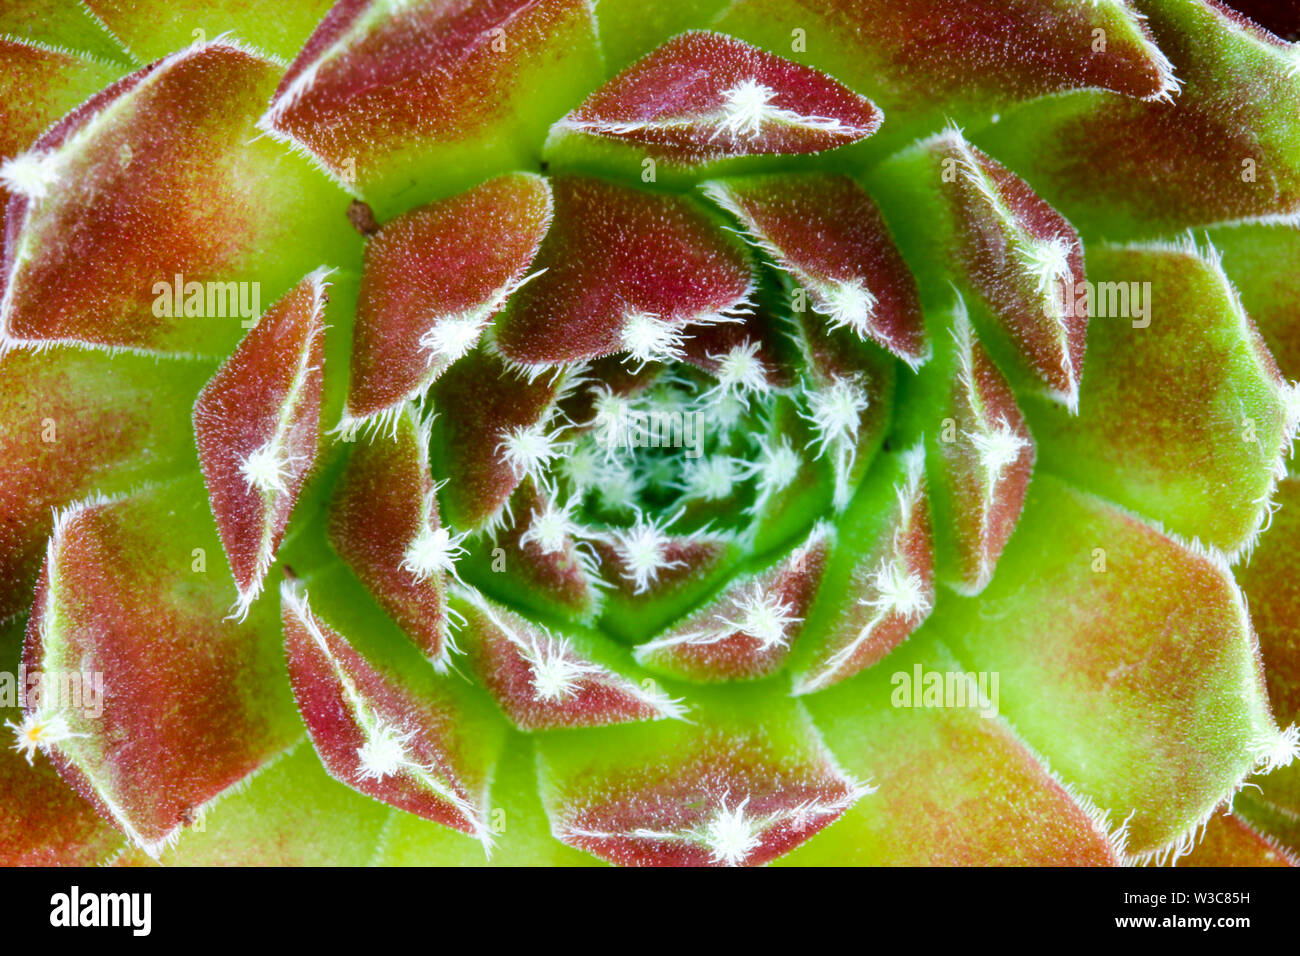 Close up detail of a Sempervivum succulent house leek plant to make an abstract floral background Stock Photo